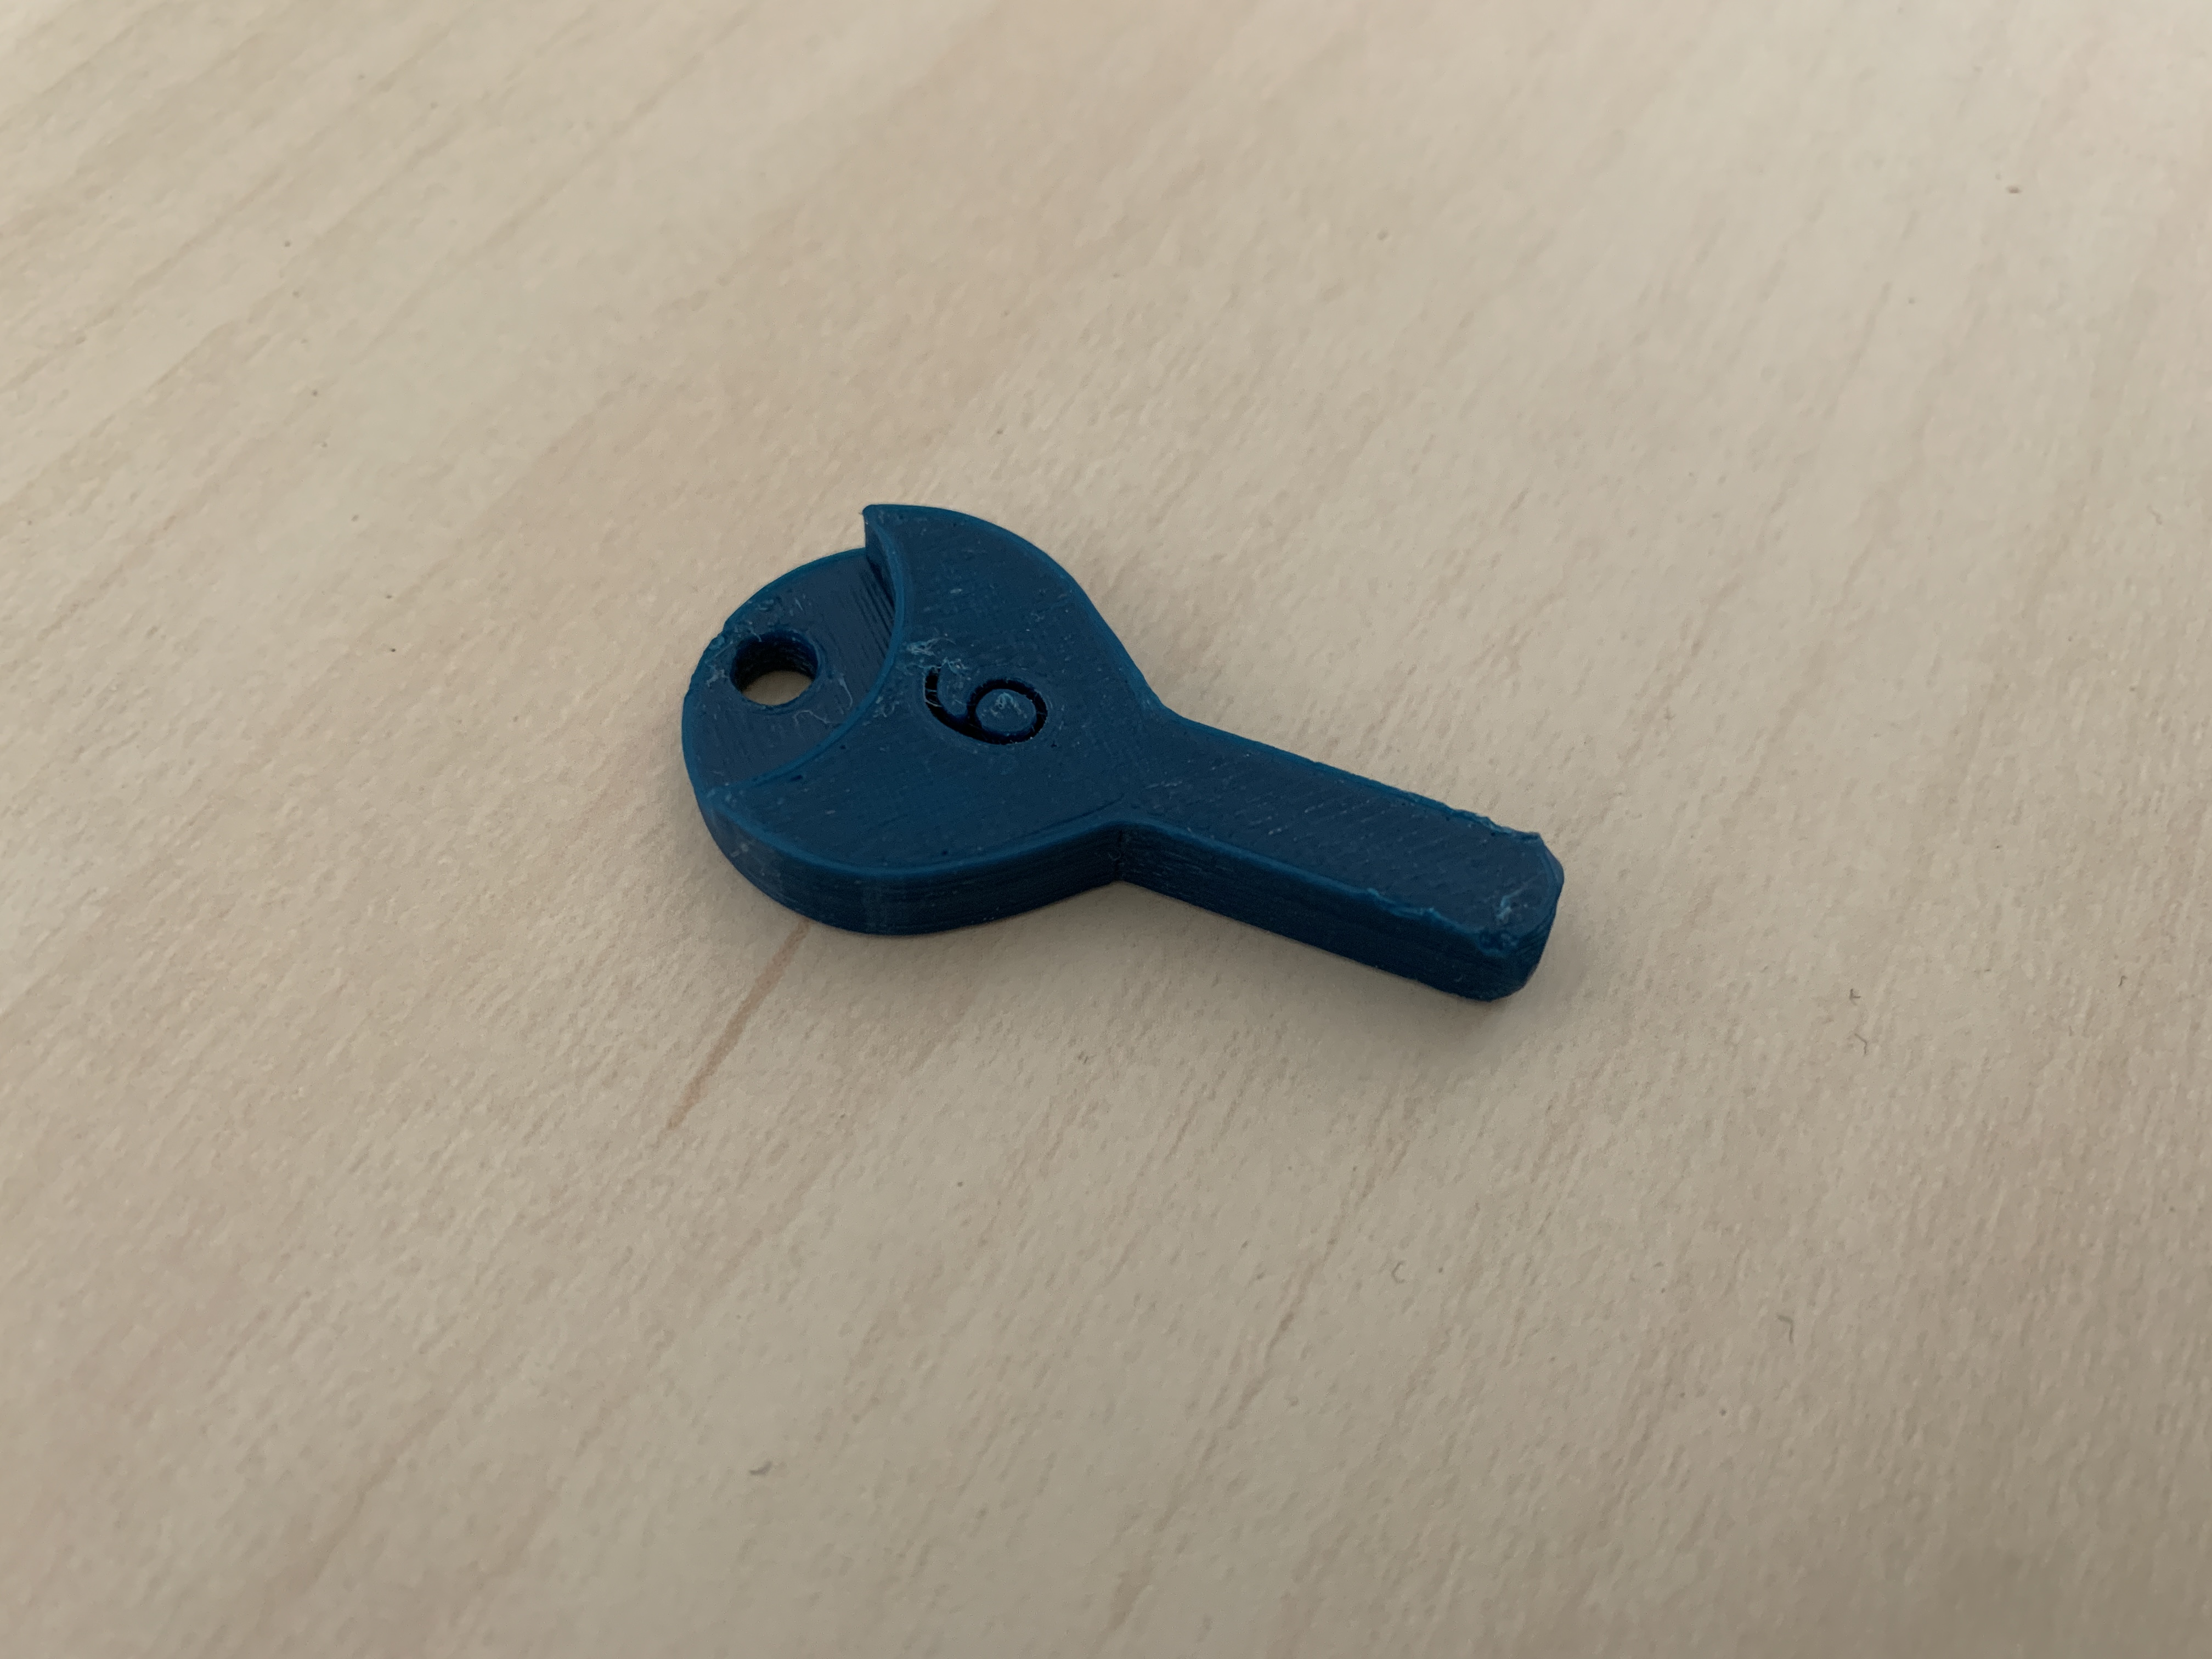 Small square profile key for utility box (6mm each side)